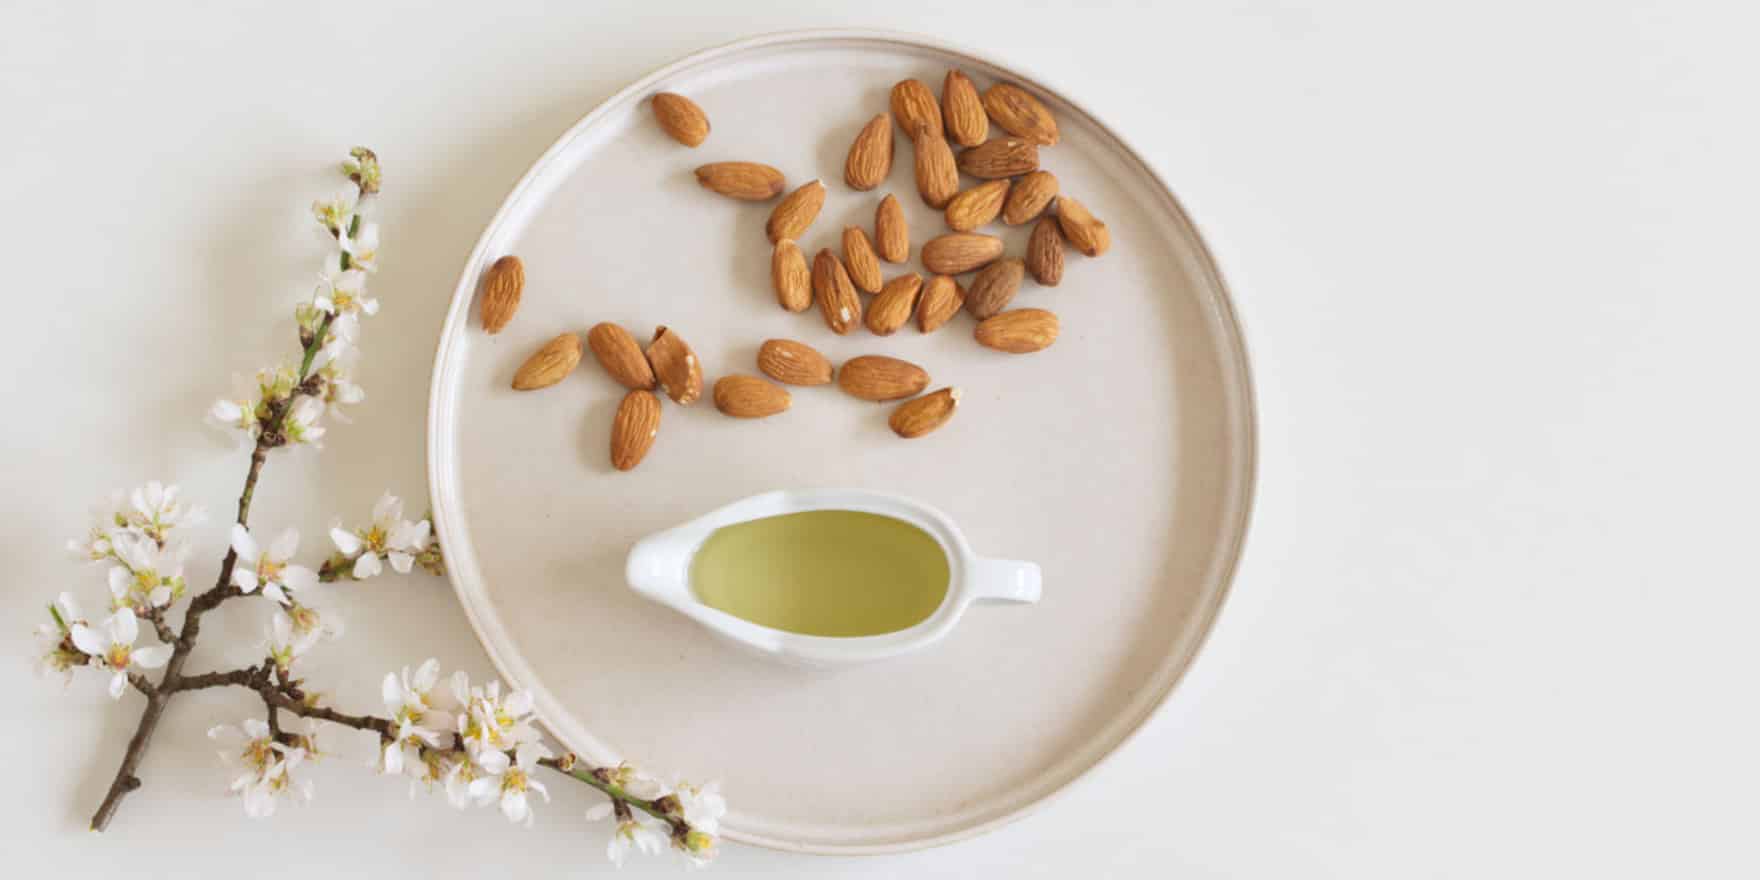 almonds on a round white plate with oil and an almond flower branch next to it